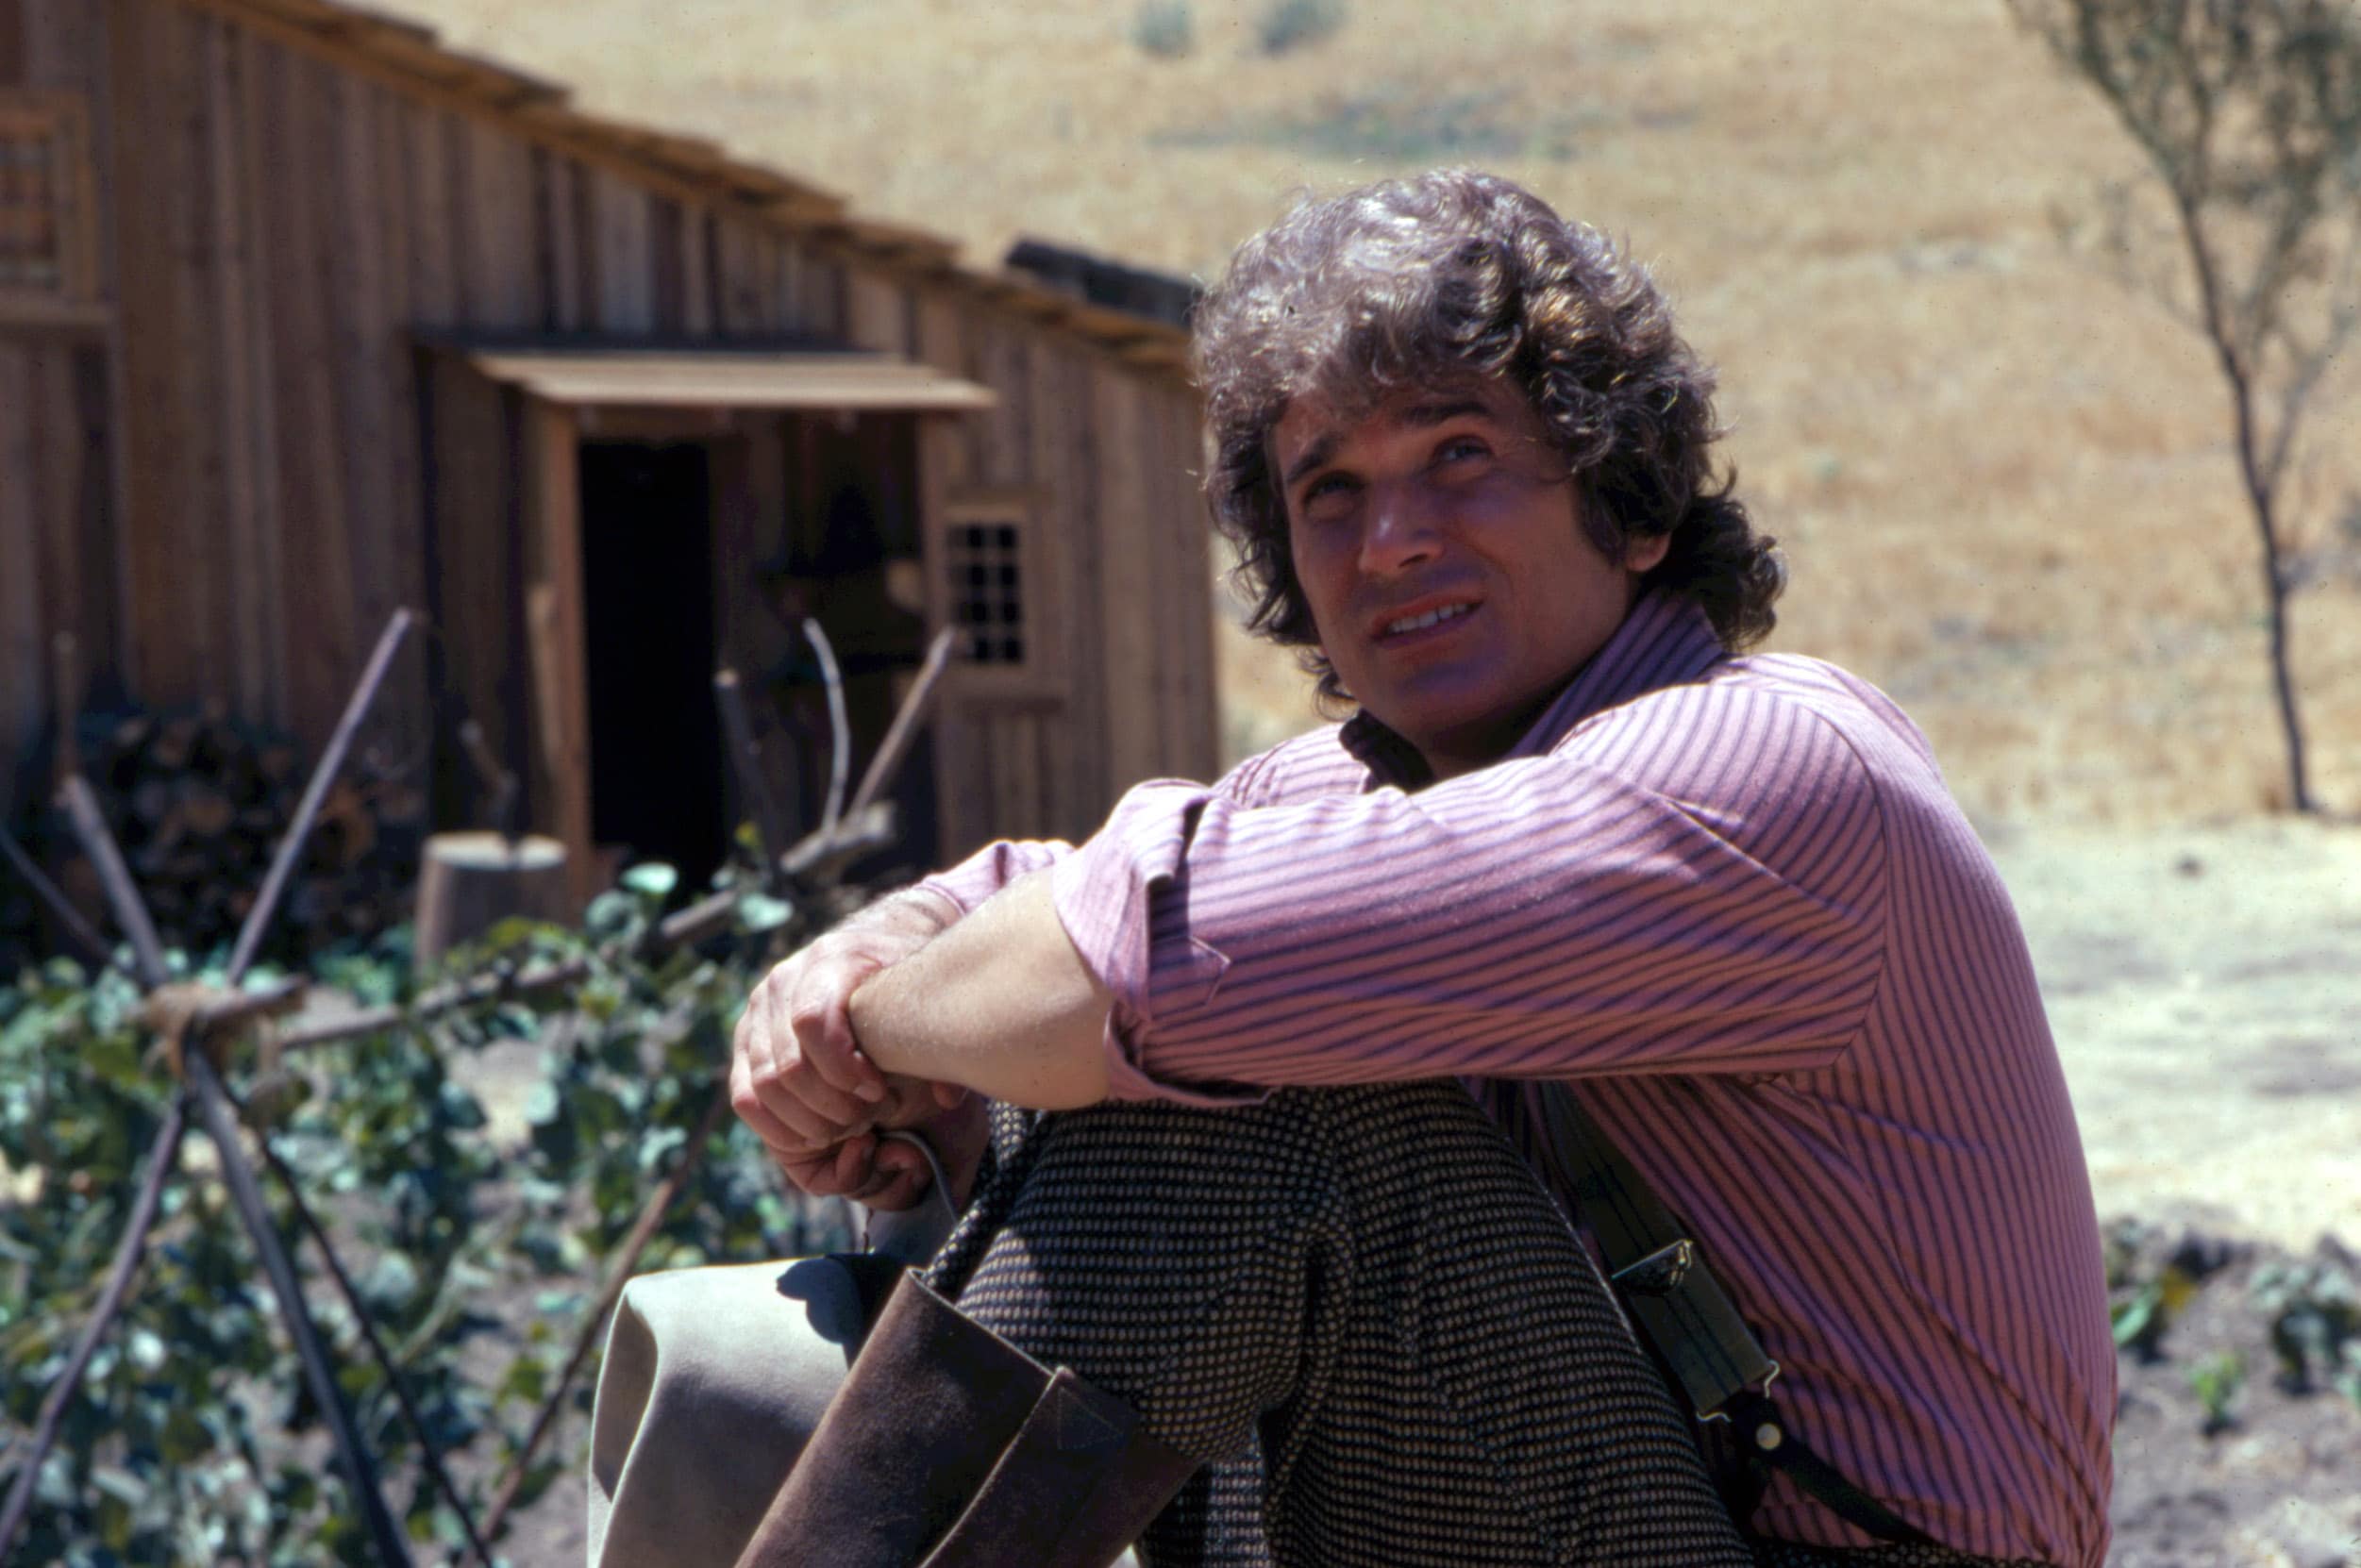 'Little House On The Prairie': Michael Landon's Off-Screen Affair Affected His Relationship With Melissa Gilbert